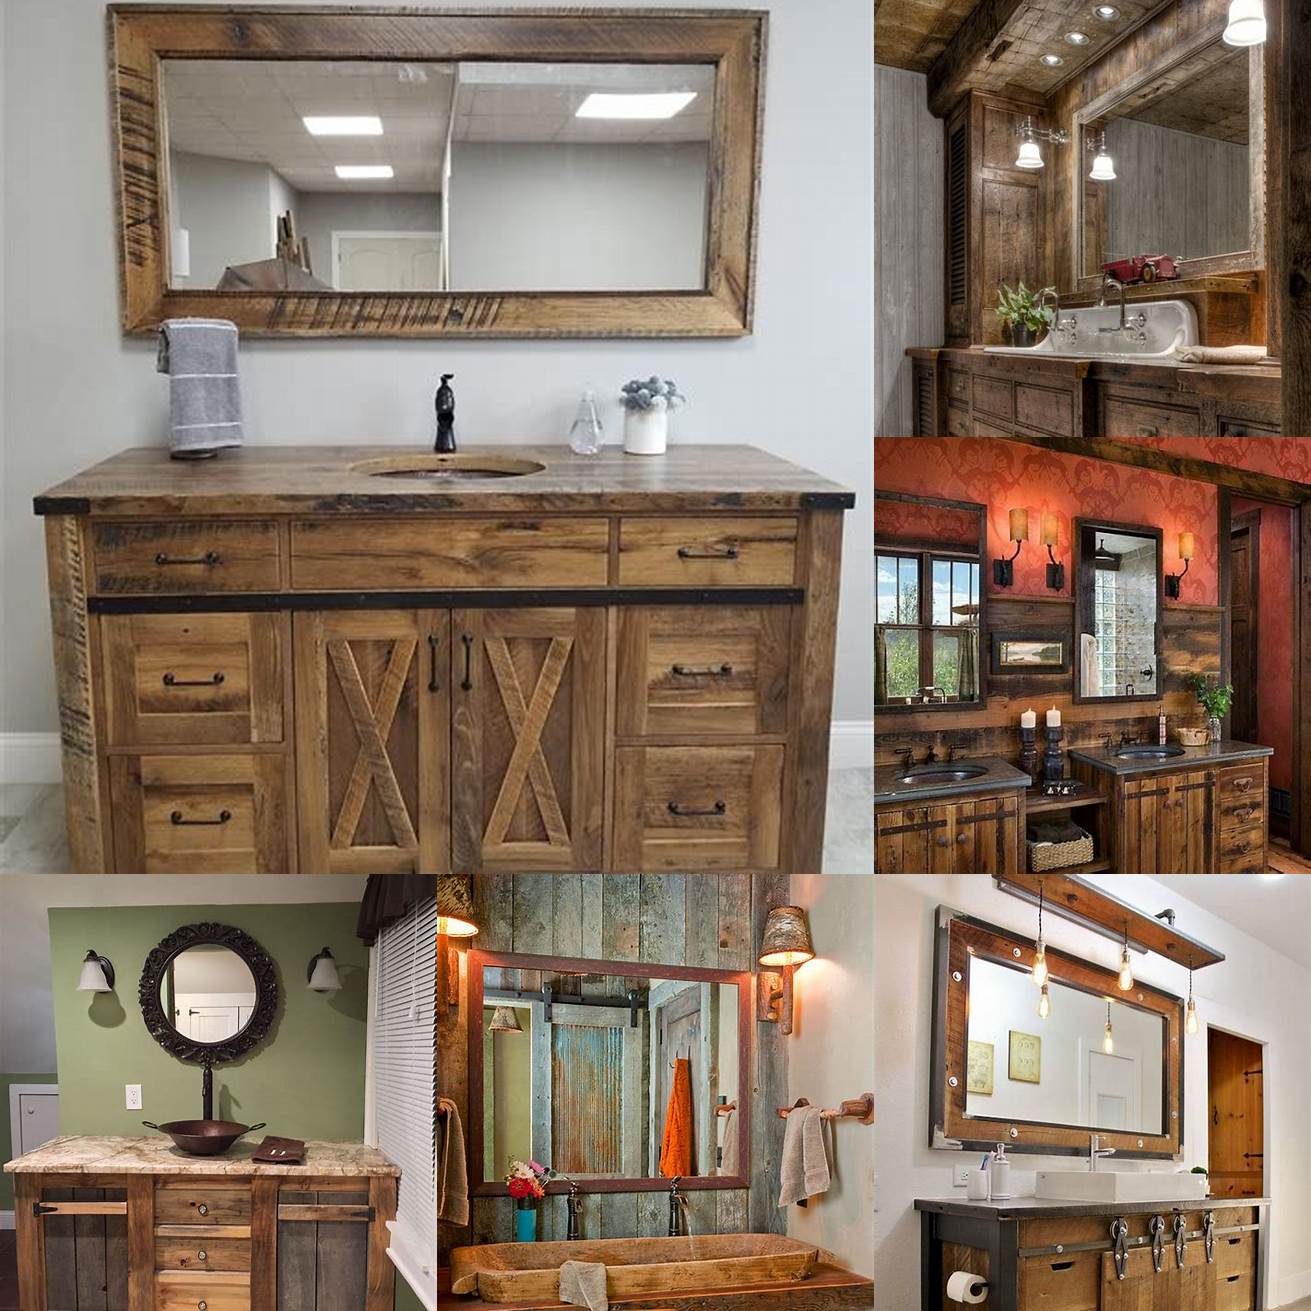 A barnwood rustic bathroom vanity can add a unique touch to your bathroom decor